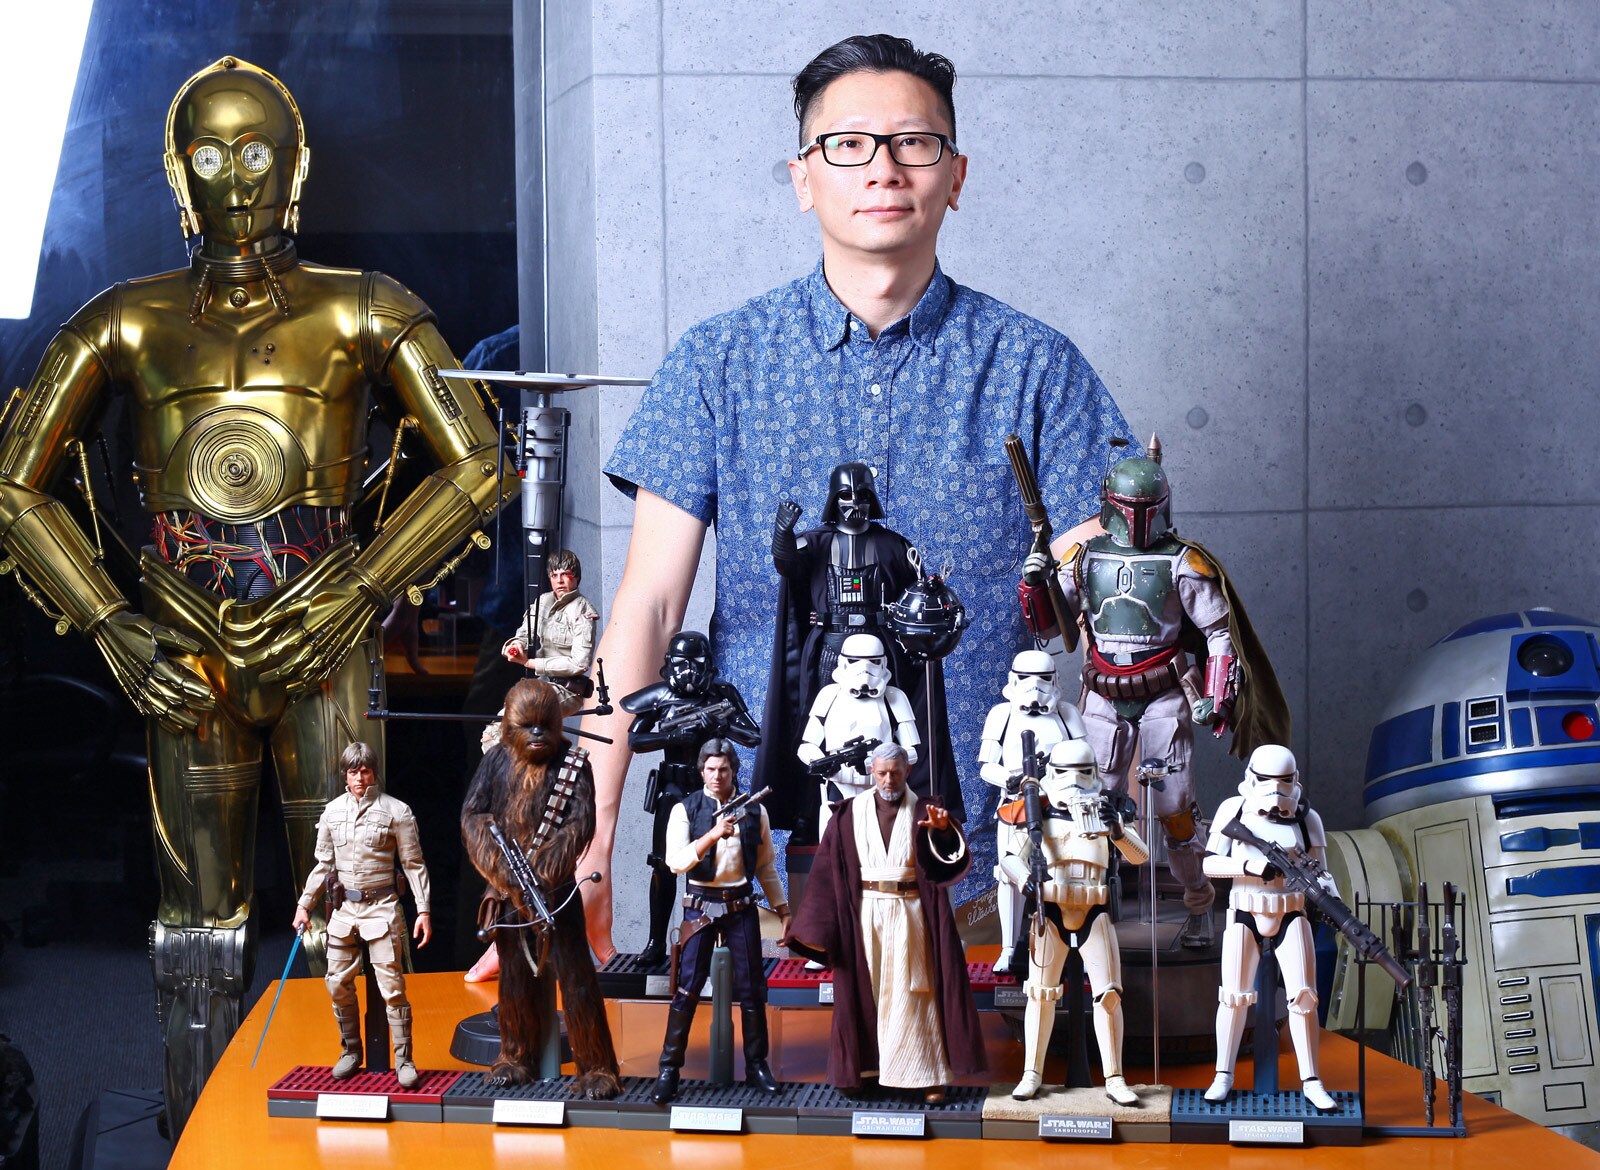 Hot Toys Feels the Force: An Interview with Founder and CEO Howard